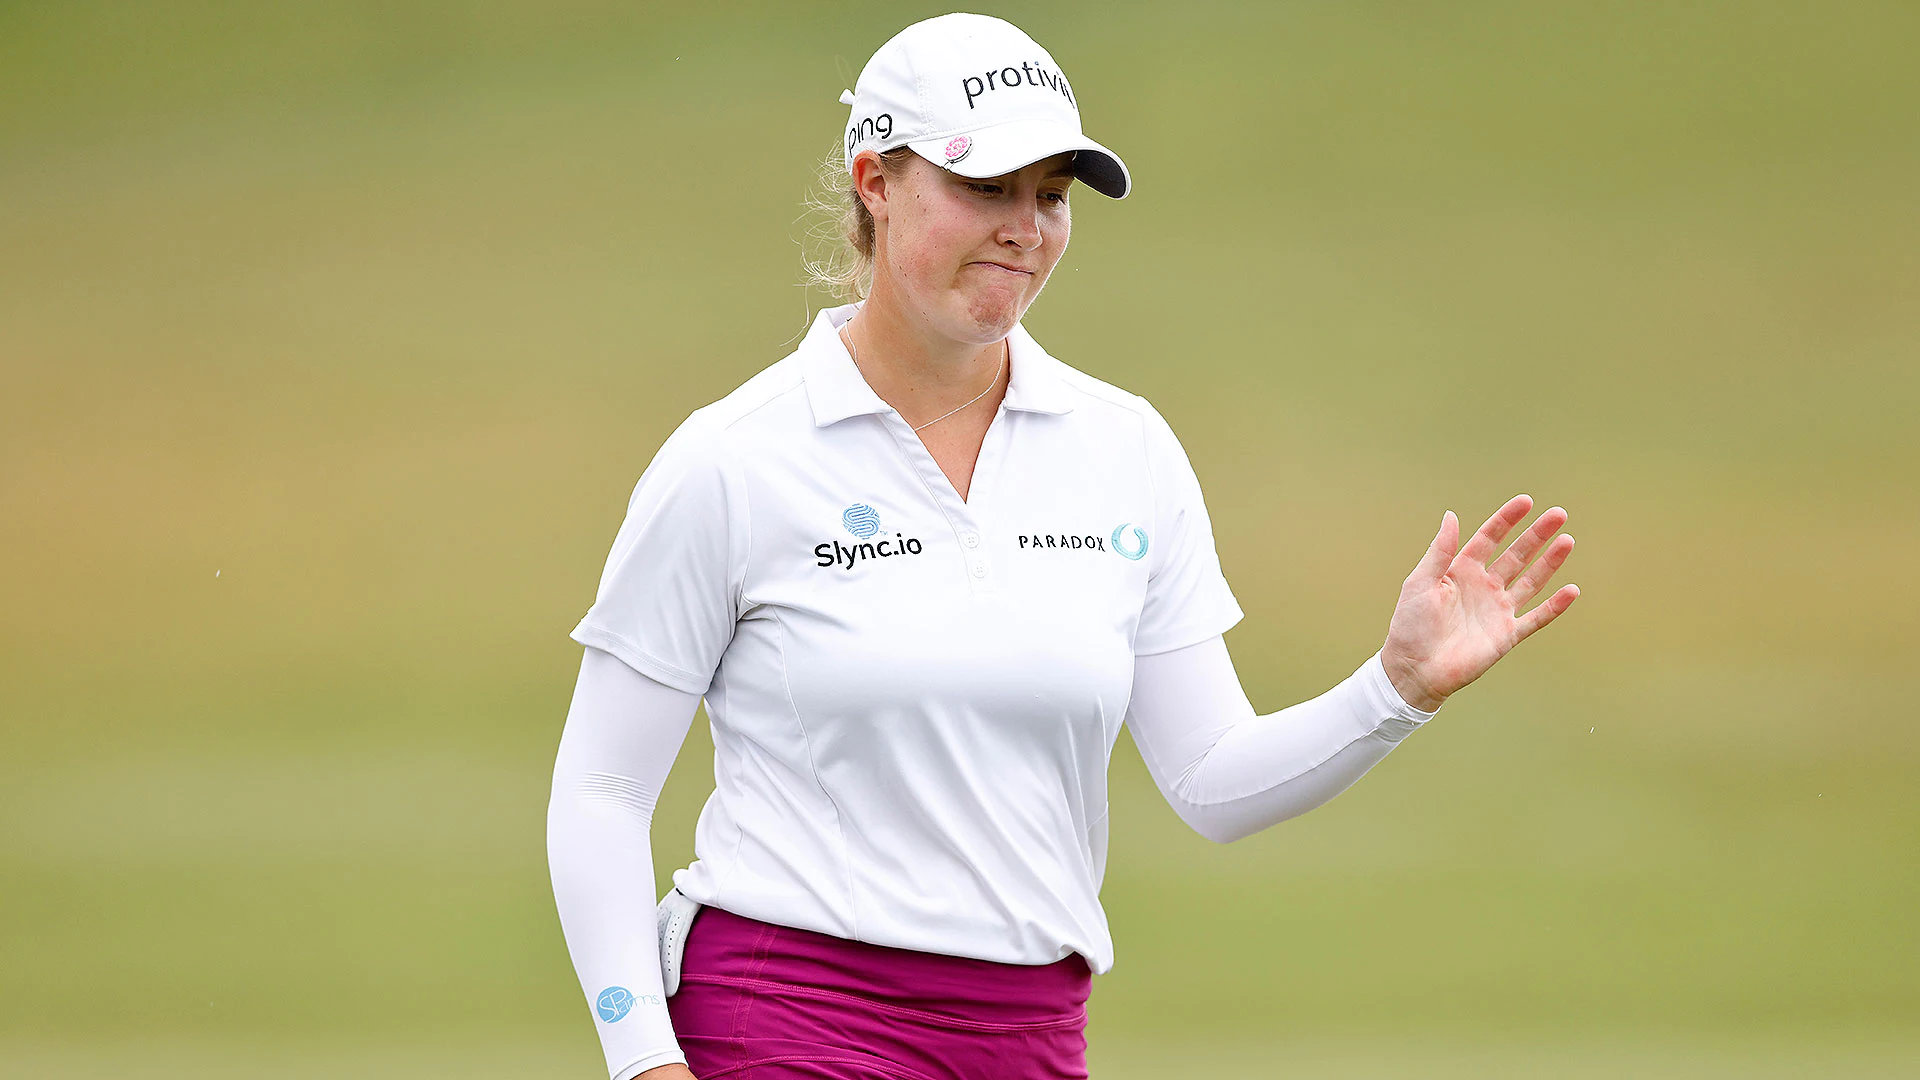 Jennifer Kupcho eyes another fun week at CME, just without the Sunday 77 this time